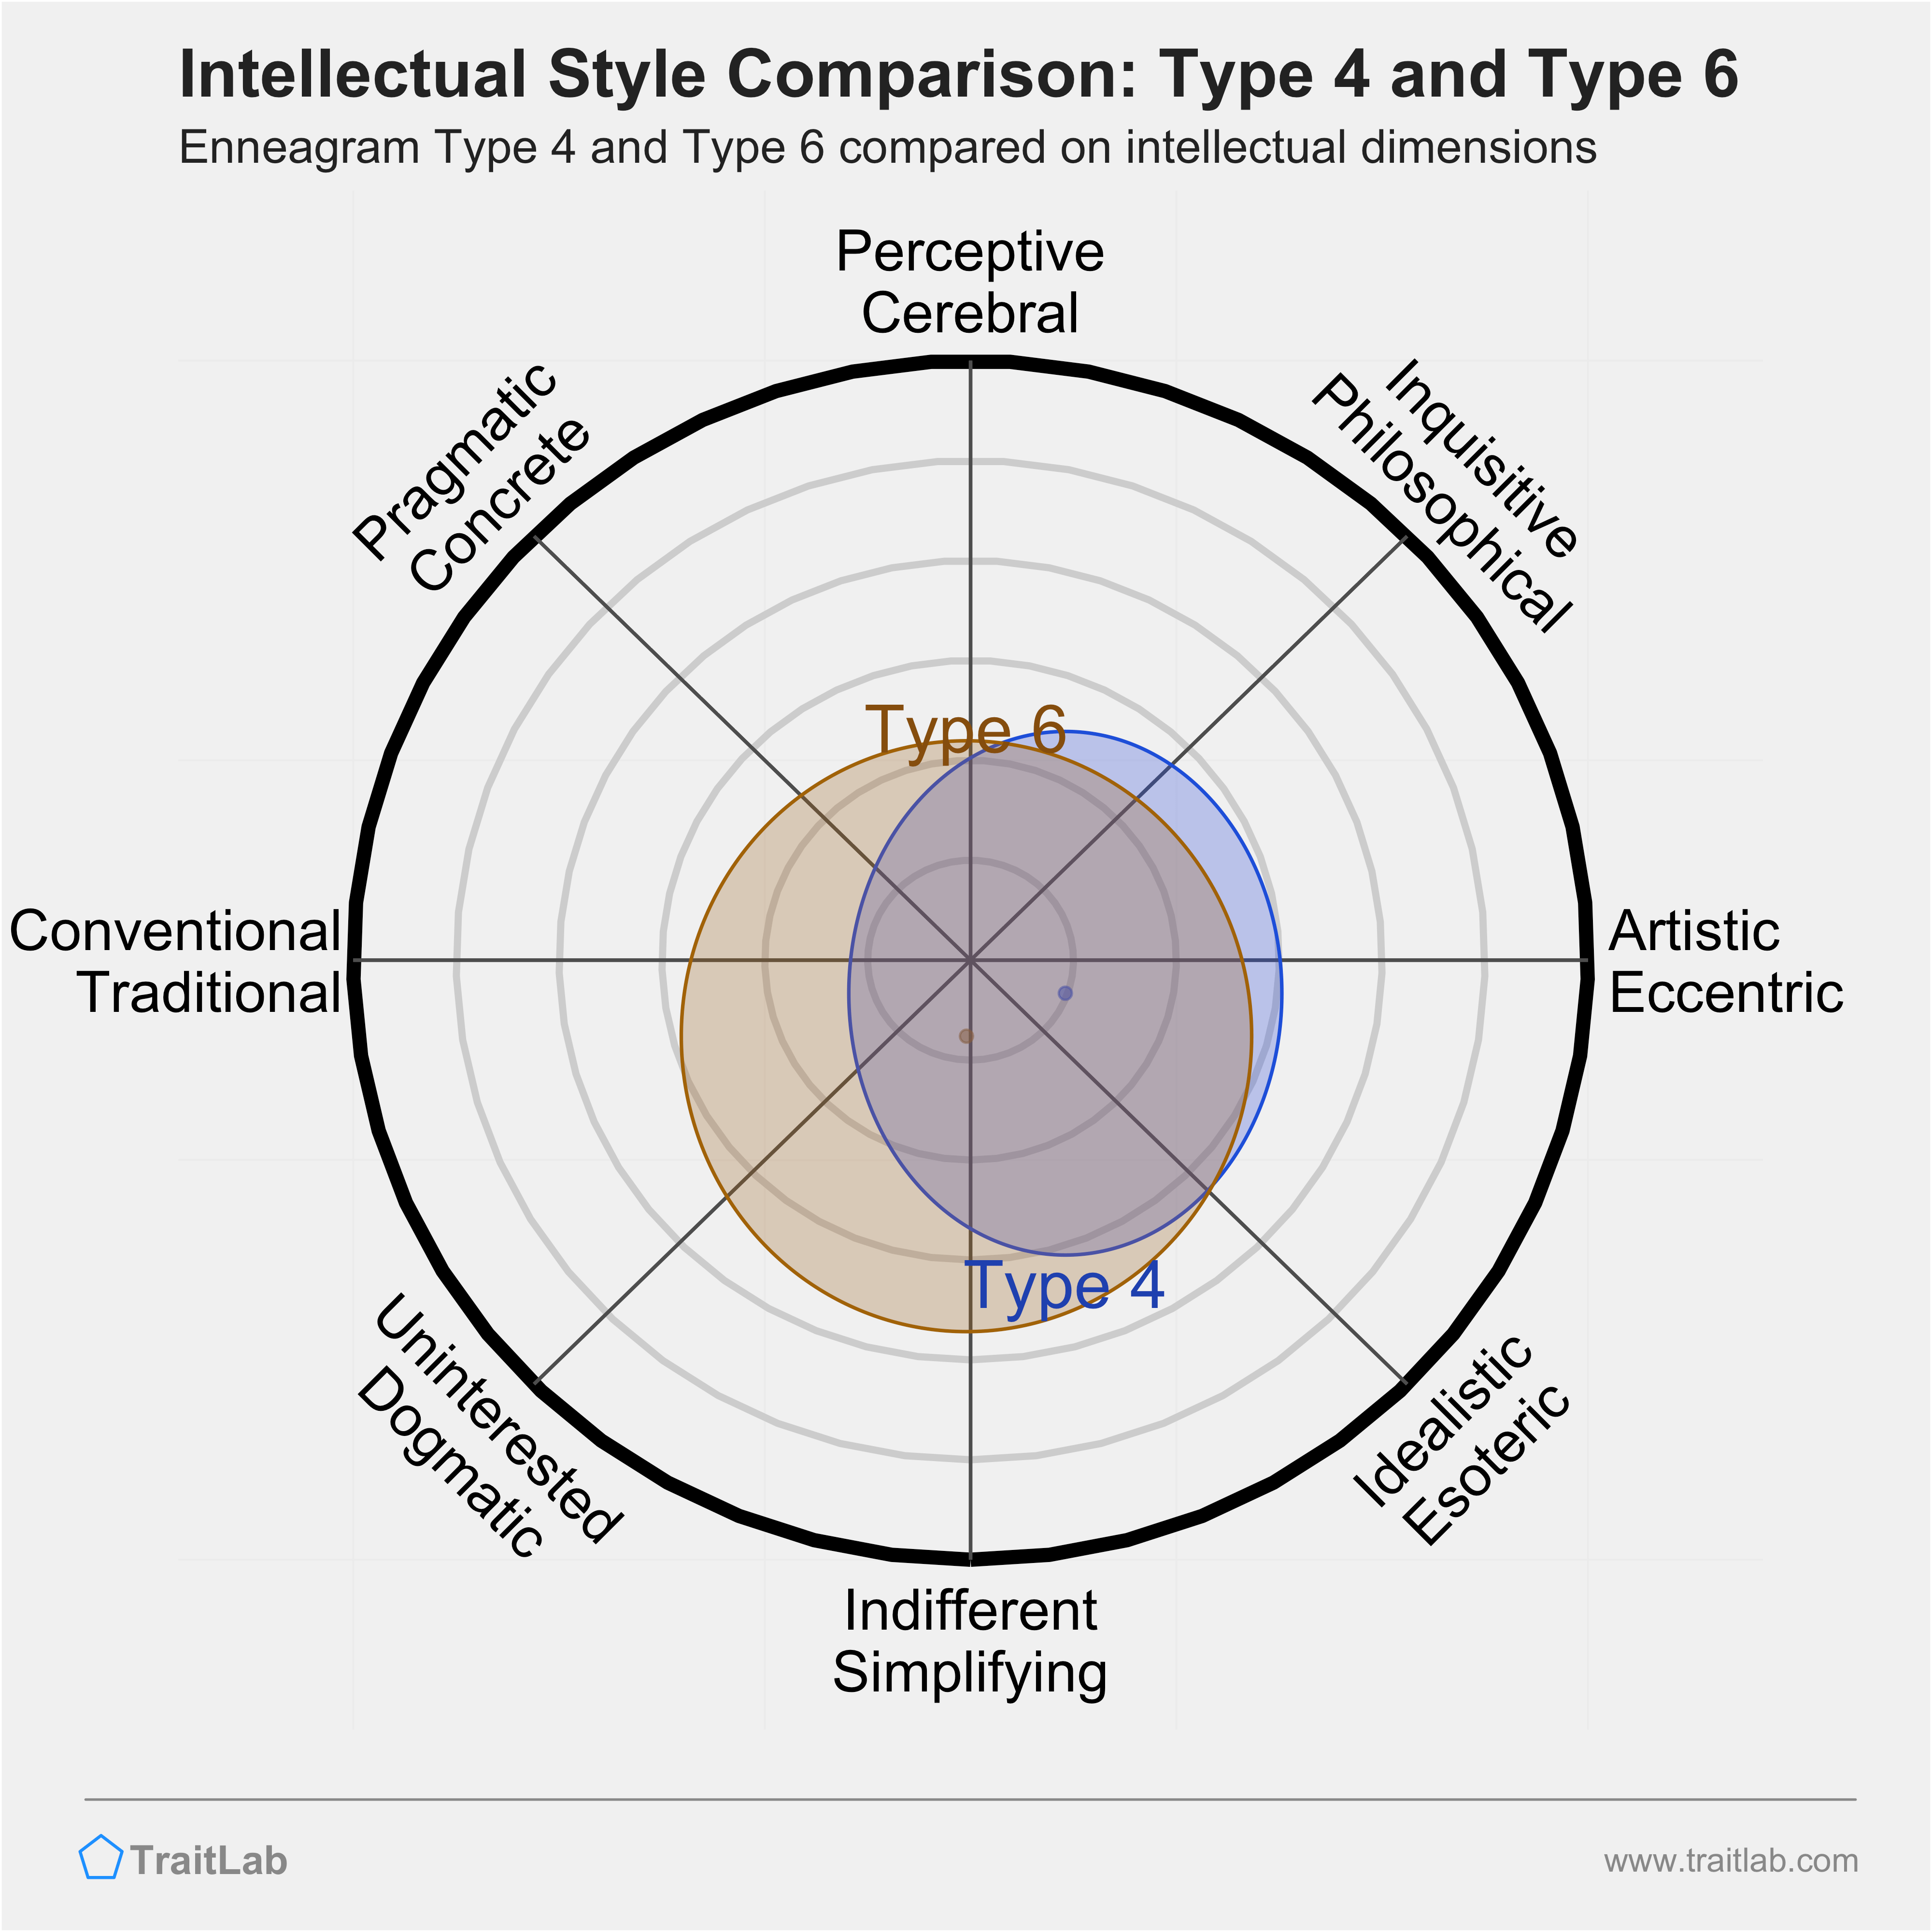 Type 4 and Type 6 comparison across intellectual dimensions